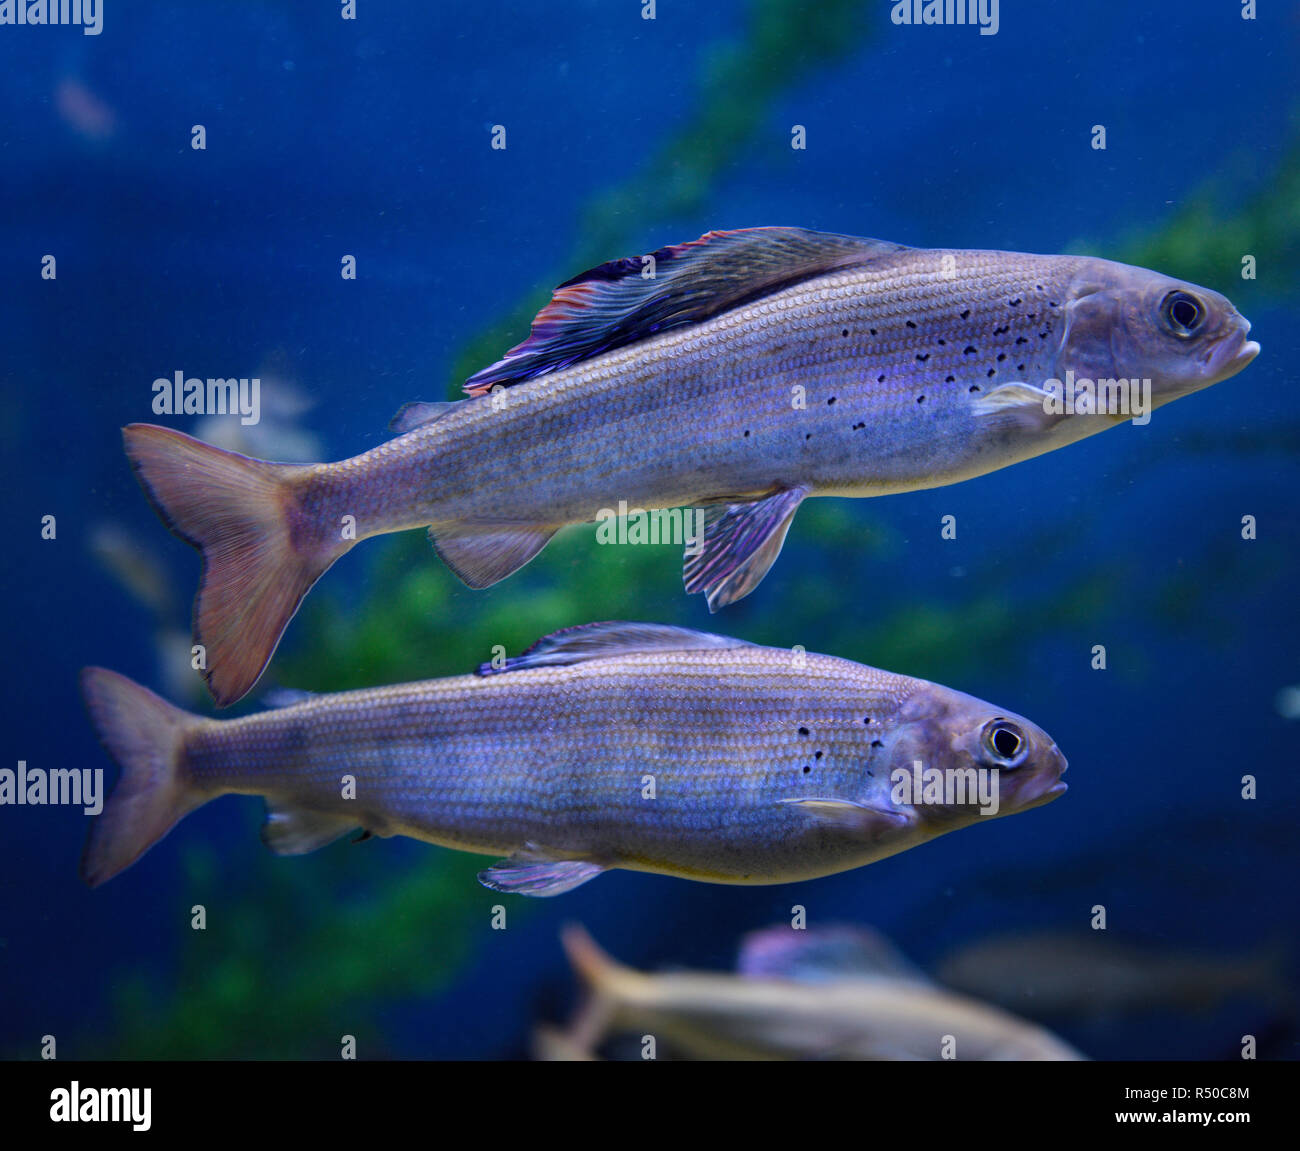 Two Arctic Grayling one with colorful dorsal fin cold freshwater fish swimming underwater in an aquarium Stock Photo